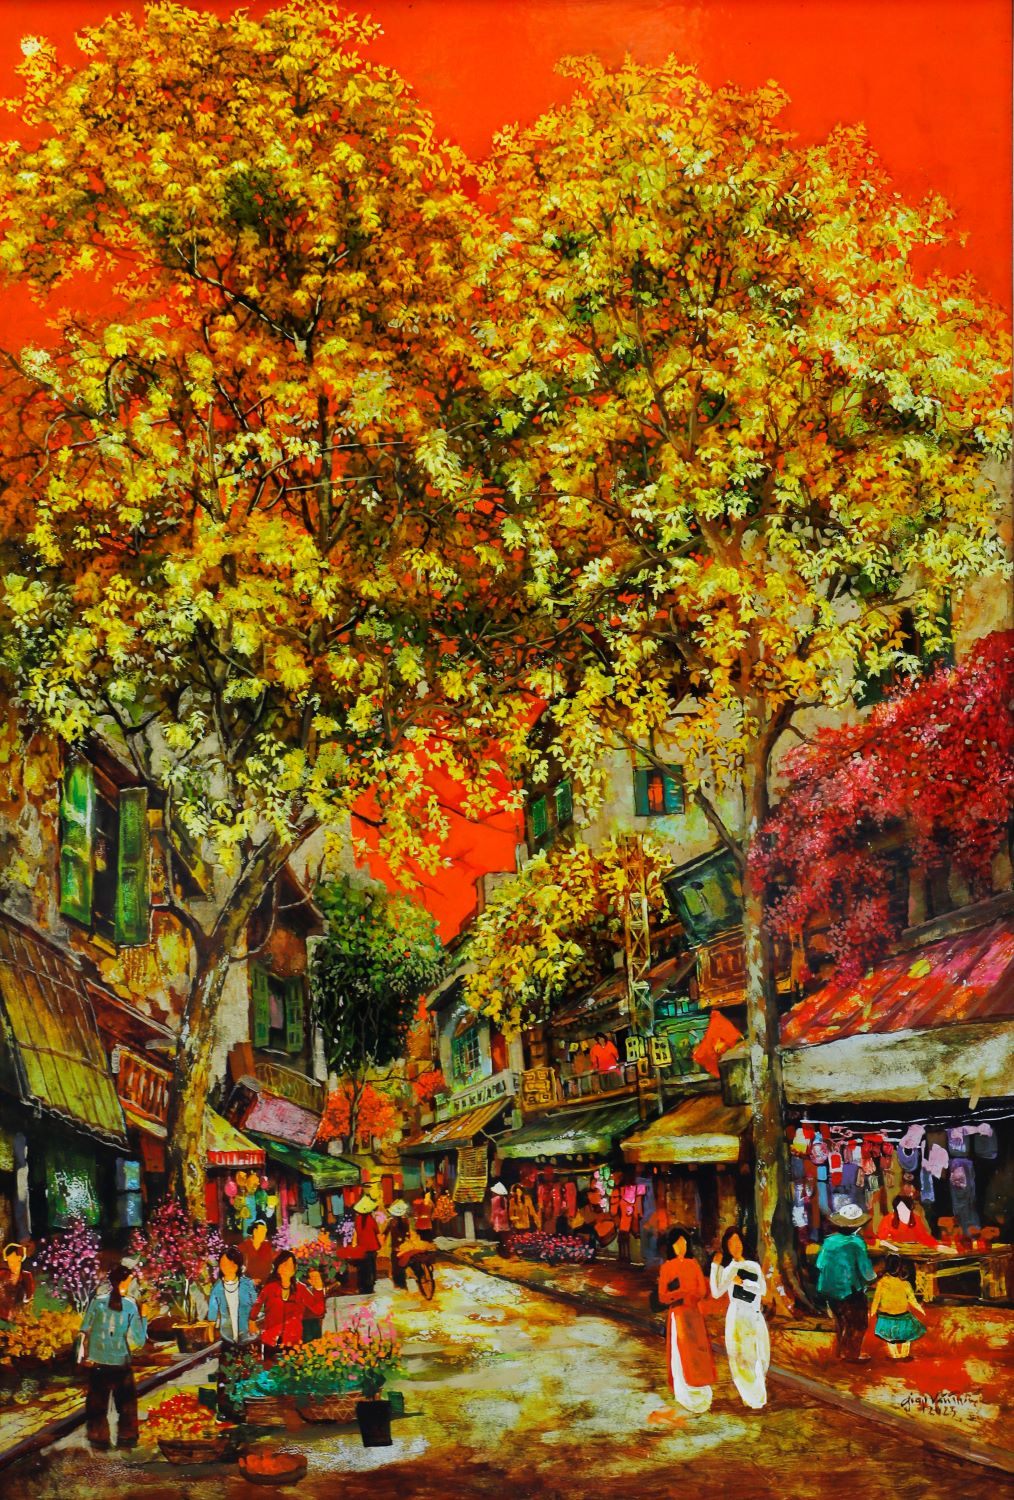 Spring Covers Spring II - Vietnamese Lacquer Painting by Artist Giap Van Tuan